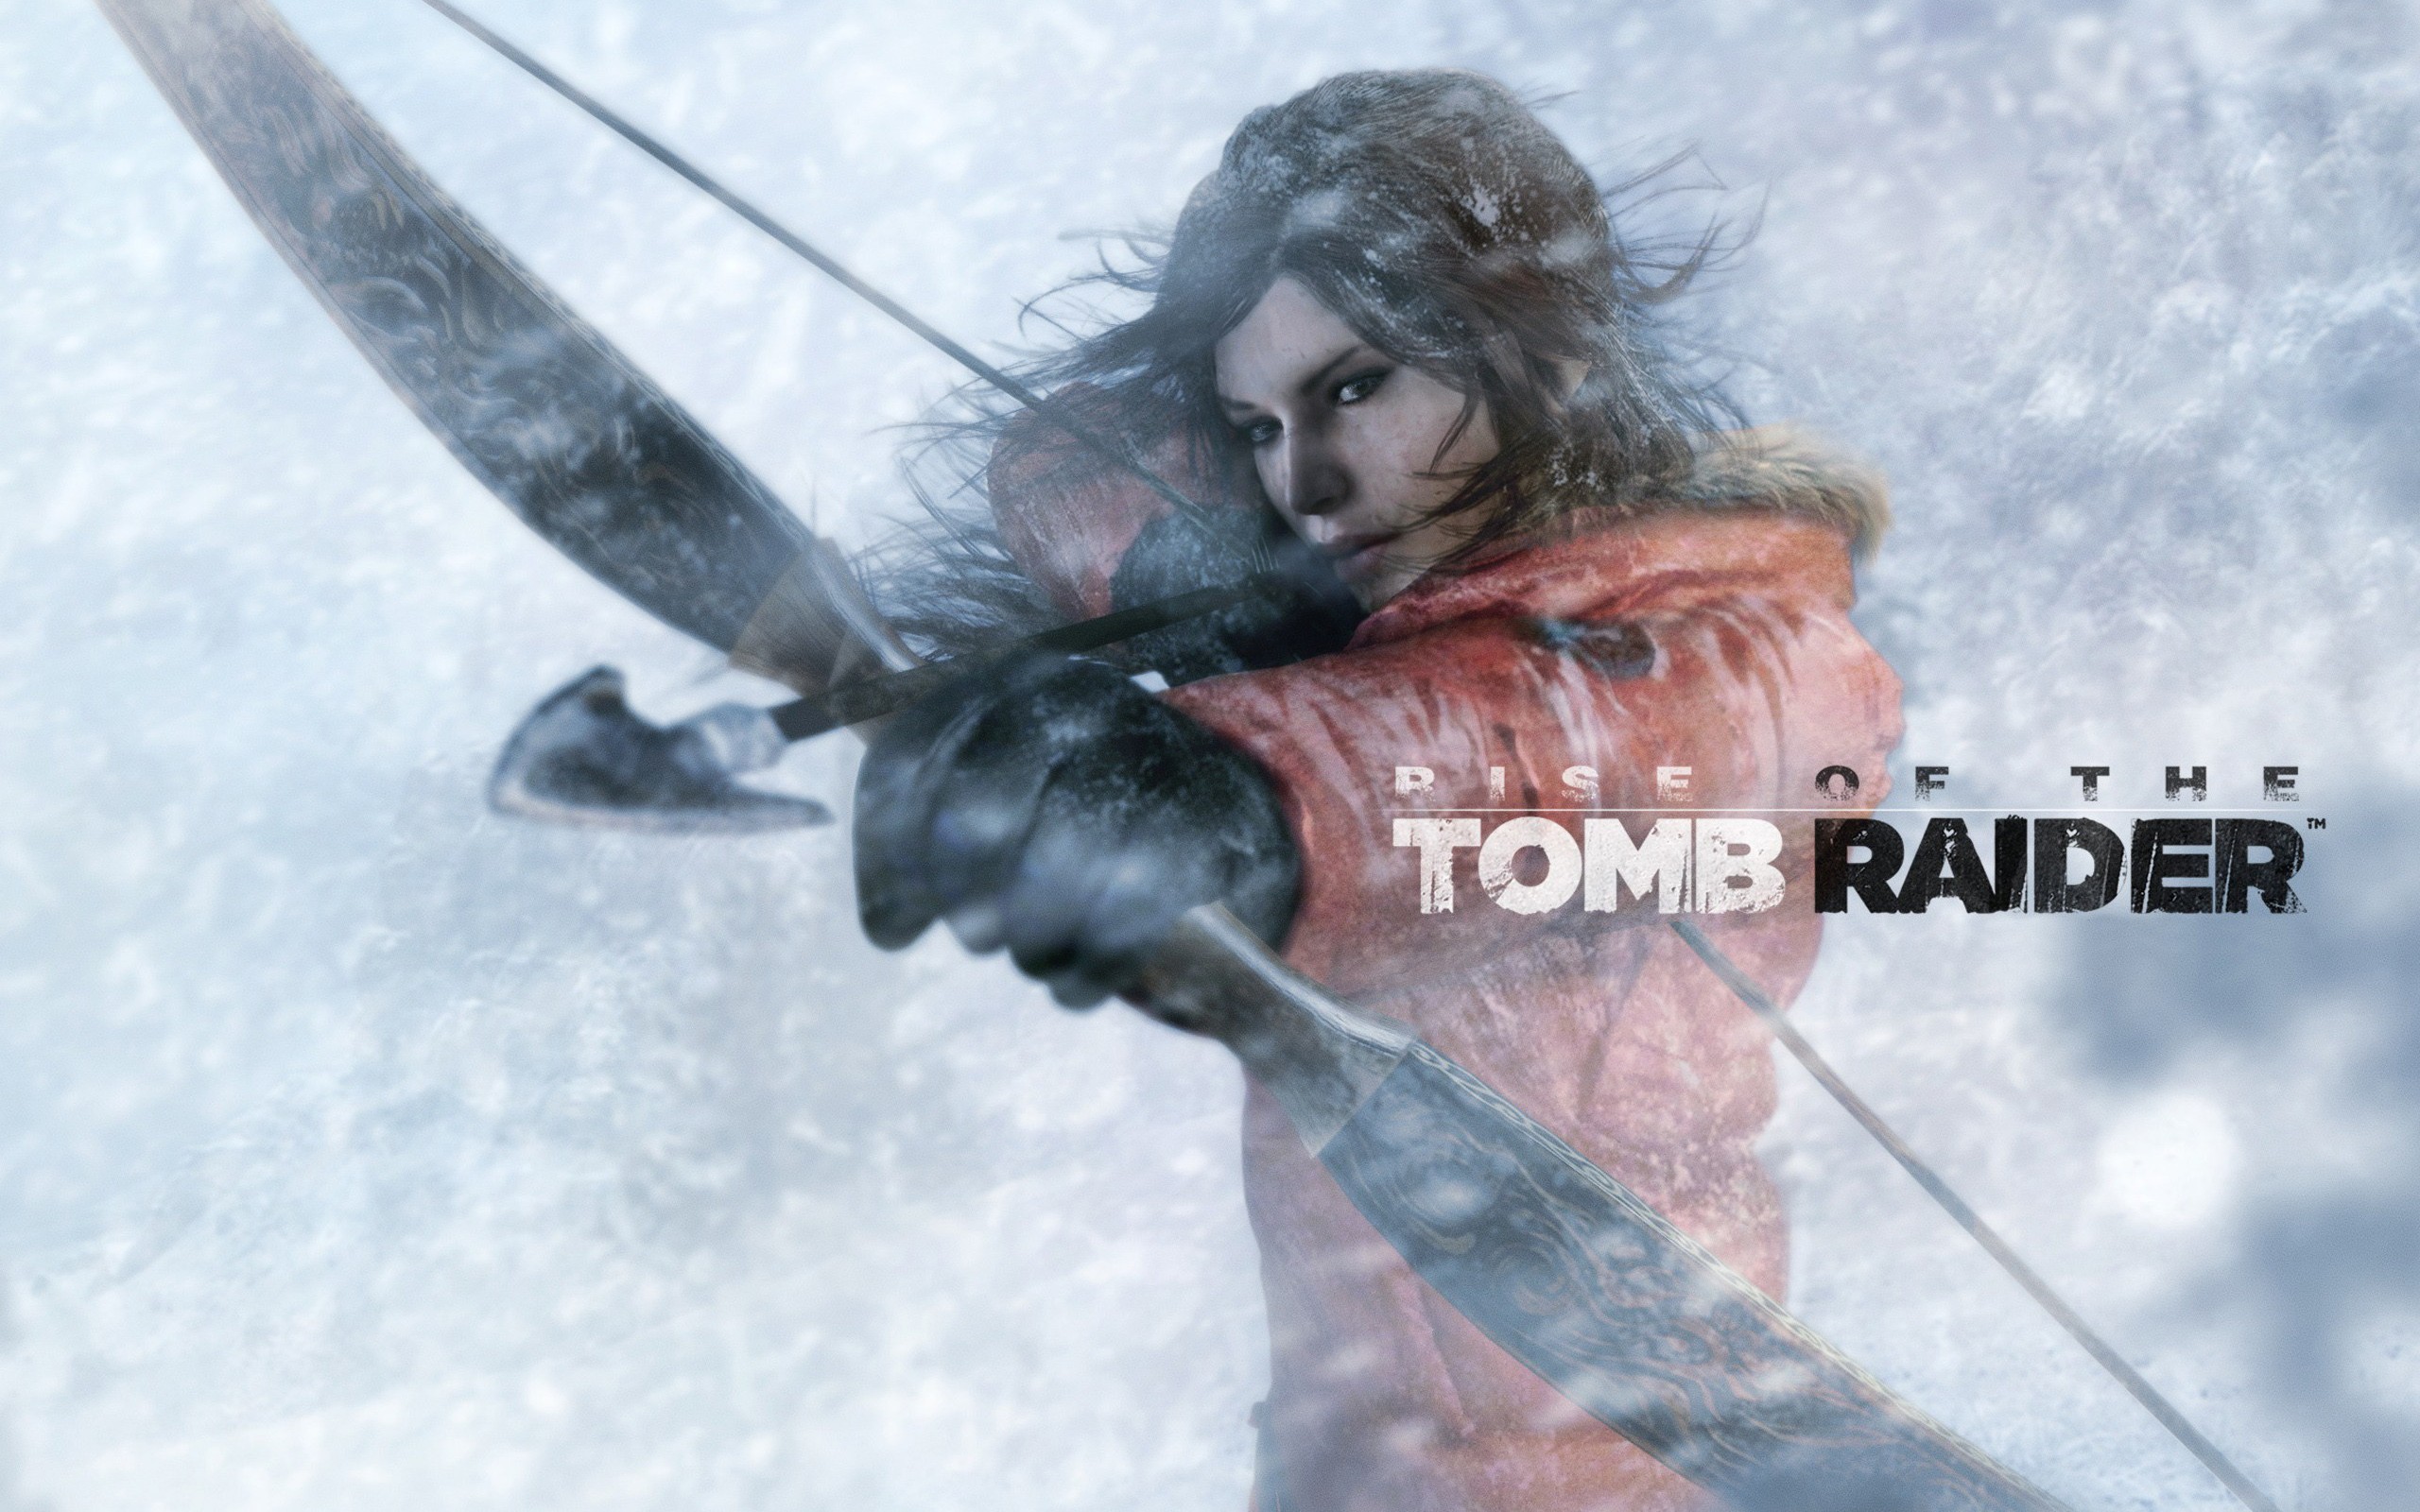 General 2560x1600 Rise of the Tomb Raider video games Tomb Raider PC gaming bow aiming video game girls video game characters women brunette Lara Croft (Tomb Raider) bow and arrow